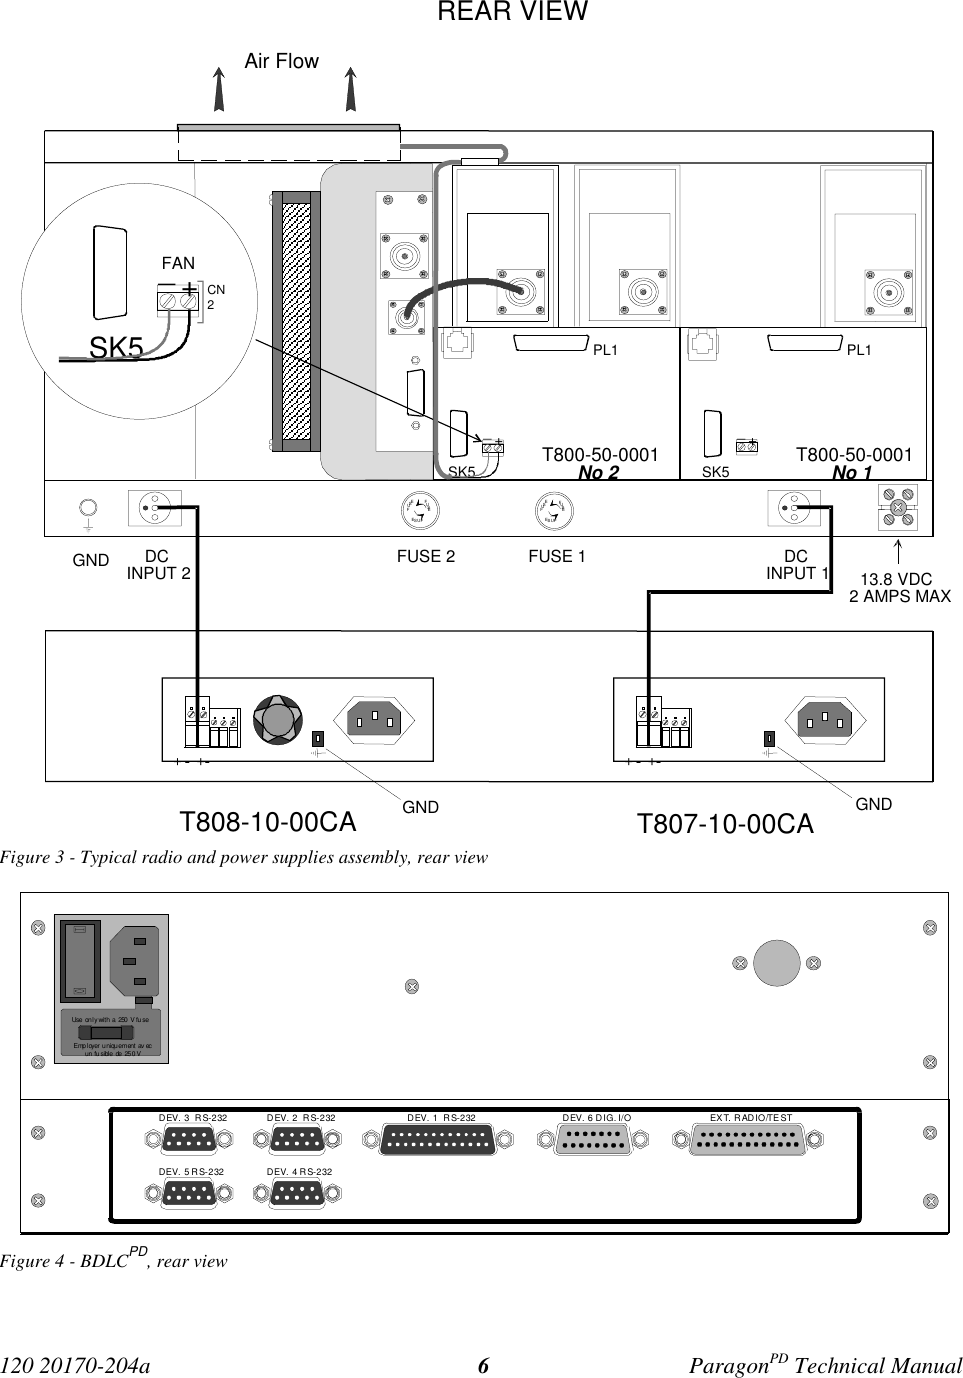 120 20170-204a ParagonPD Technical Manual6Figure 3 - Typical radio and power supplies assembly, rear viewFigure 4 - BDLCPD, rear viewEmployer uniquement av ecun  fusible  de 250 VUse  on l y wi th  a  250  V  fu seDEV. 3  R S-232DEV. 5  RS-232DEV. 2  RS-232DEV. 4  RS-232DEV. 1  RS-232 DEV. 6 DIG. I/O EXT. RADIO/TESTT808-10-00CA T807-10-00CAREAR VIEWAir FlowGNDDCINPUT 1FUSE 1FUSE 2DCINPUT 2 13.8 VDC2 AMPS MAXFUSEFUSEFUSEFUSEFUSEFUSE+-+-+-+-GNDGNDT800-50-0001No 1PL1SK5T800-50-0001No 2PL1SK5_+_+SK5_+FANCN2